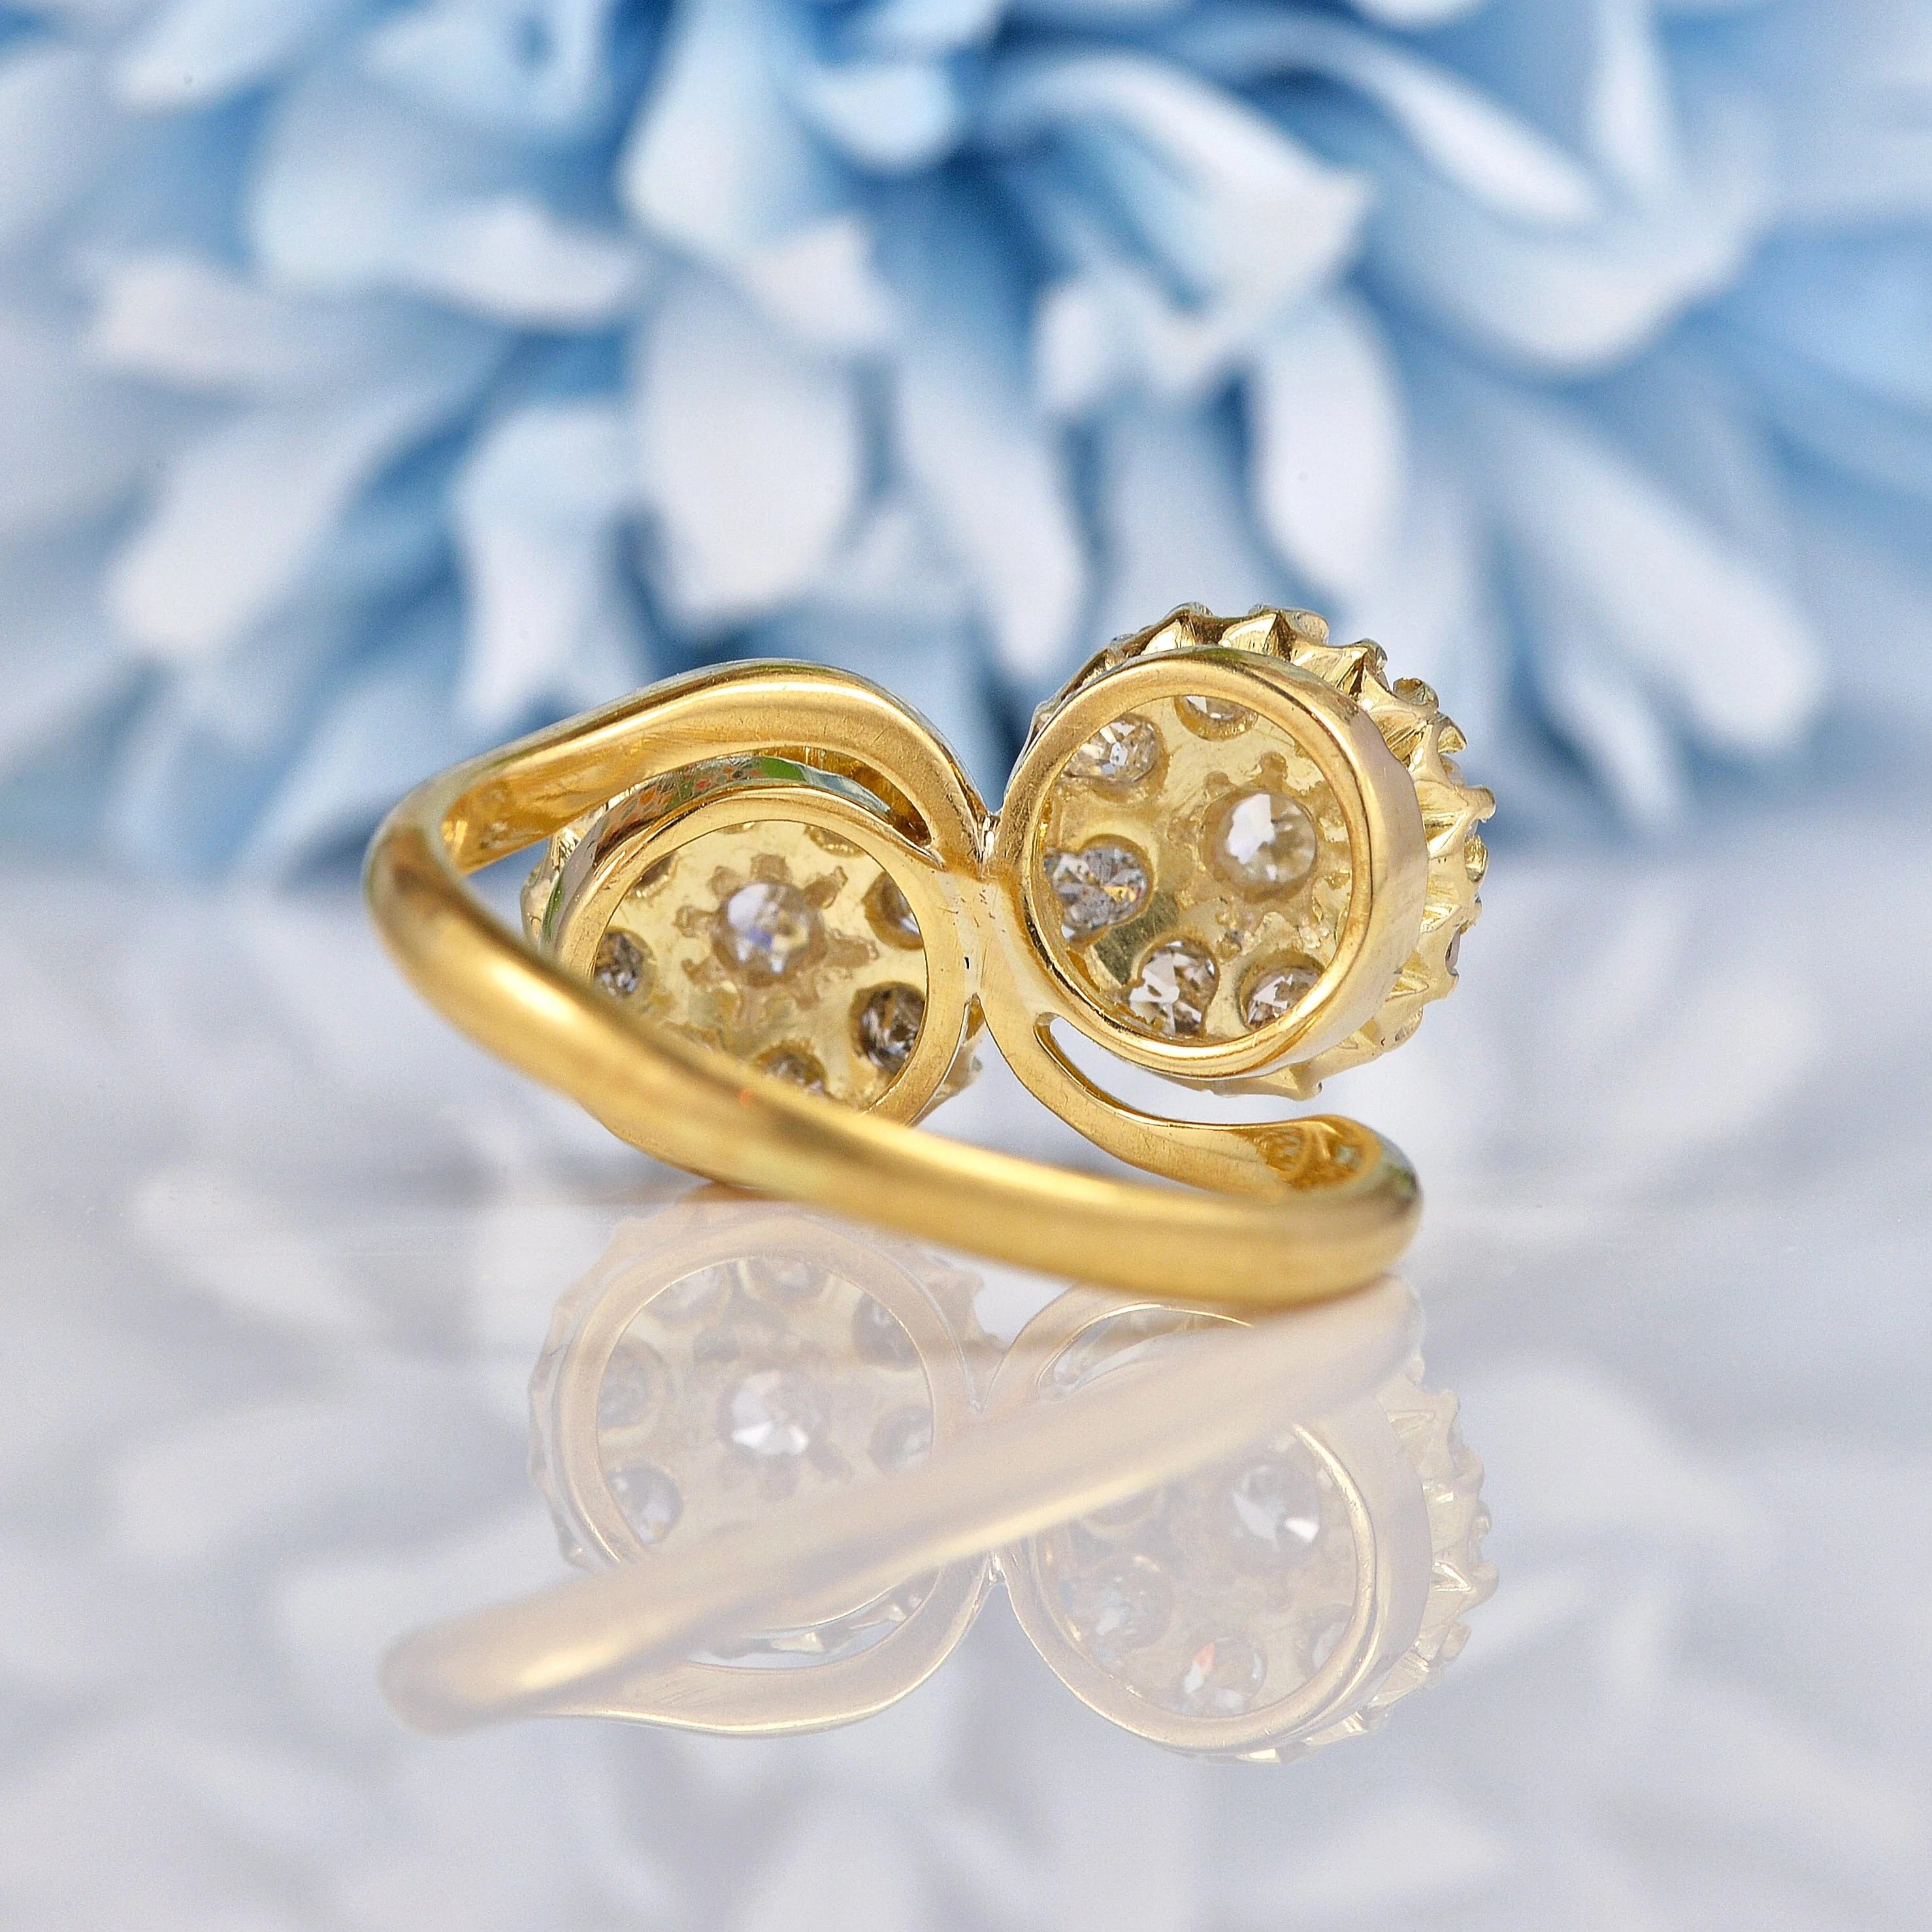 Ellibelle Jewellery Antique Edwardian Diamond 18ct Gold Double Daisy Cluster Ring